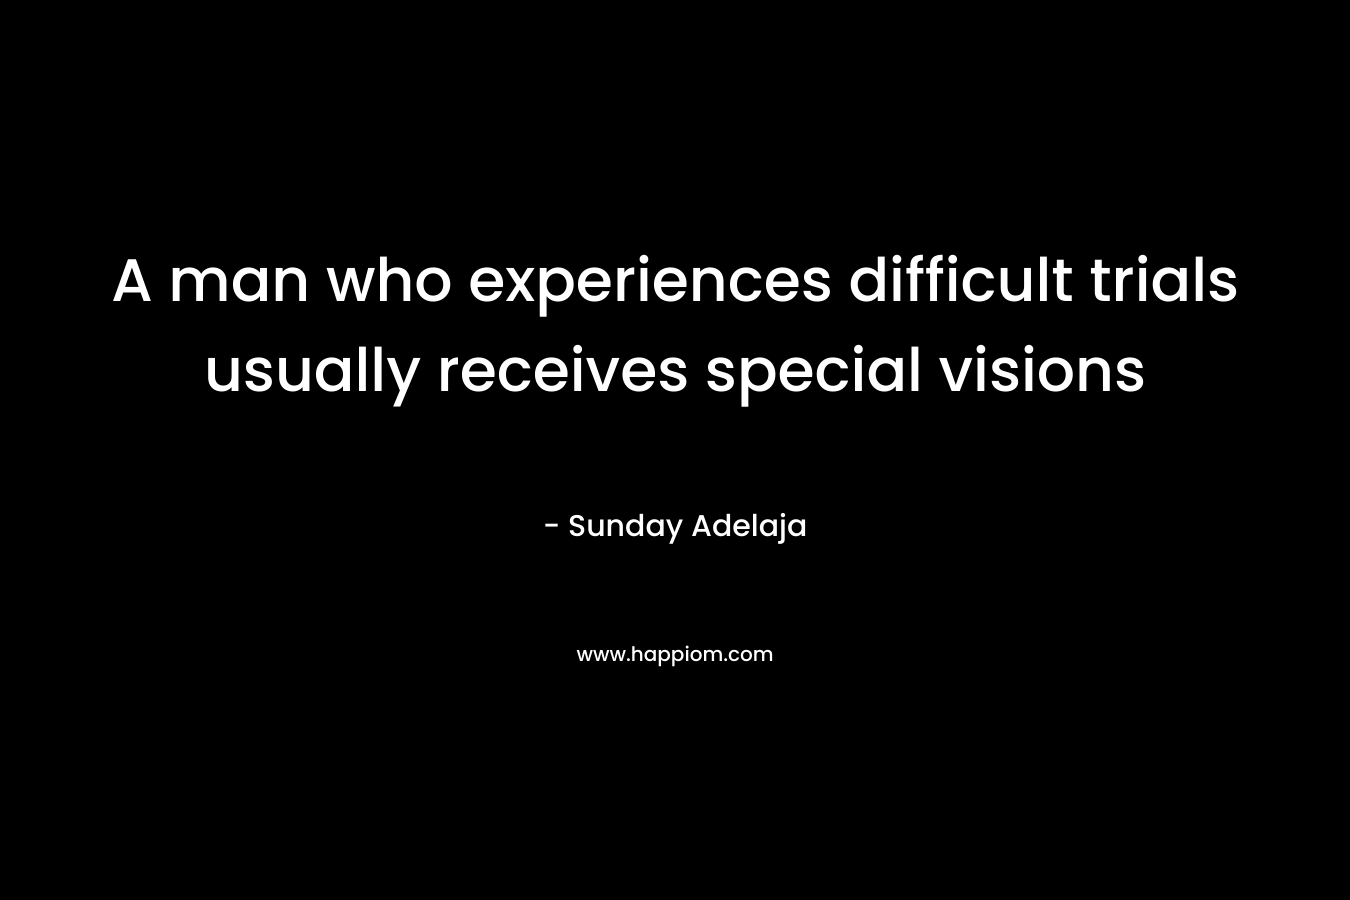 A man who experiences difficult trials usually receives special visions